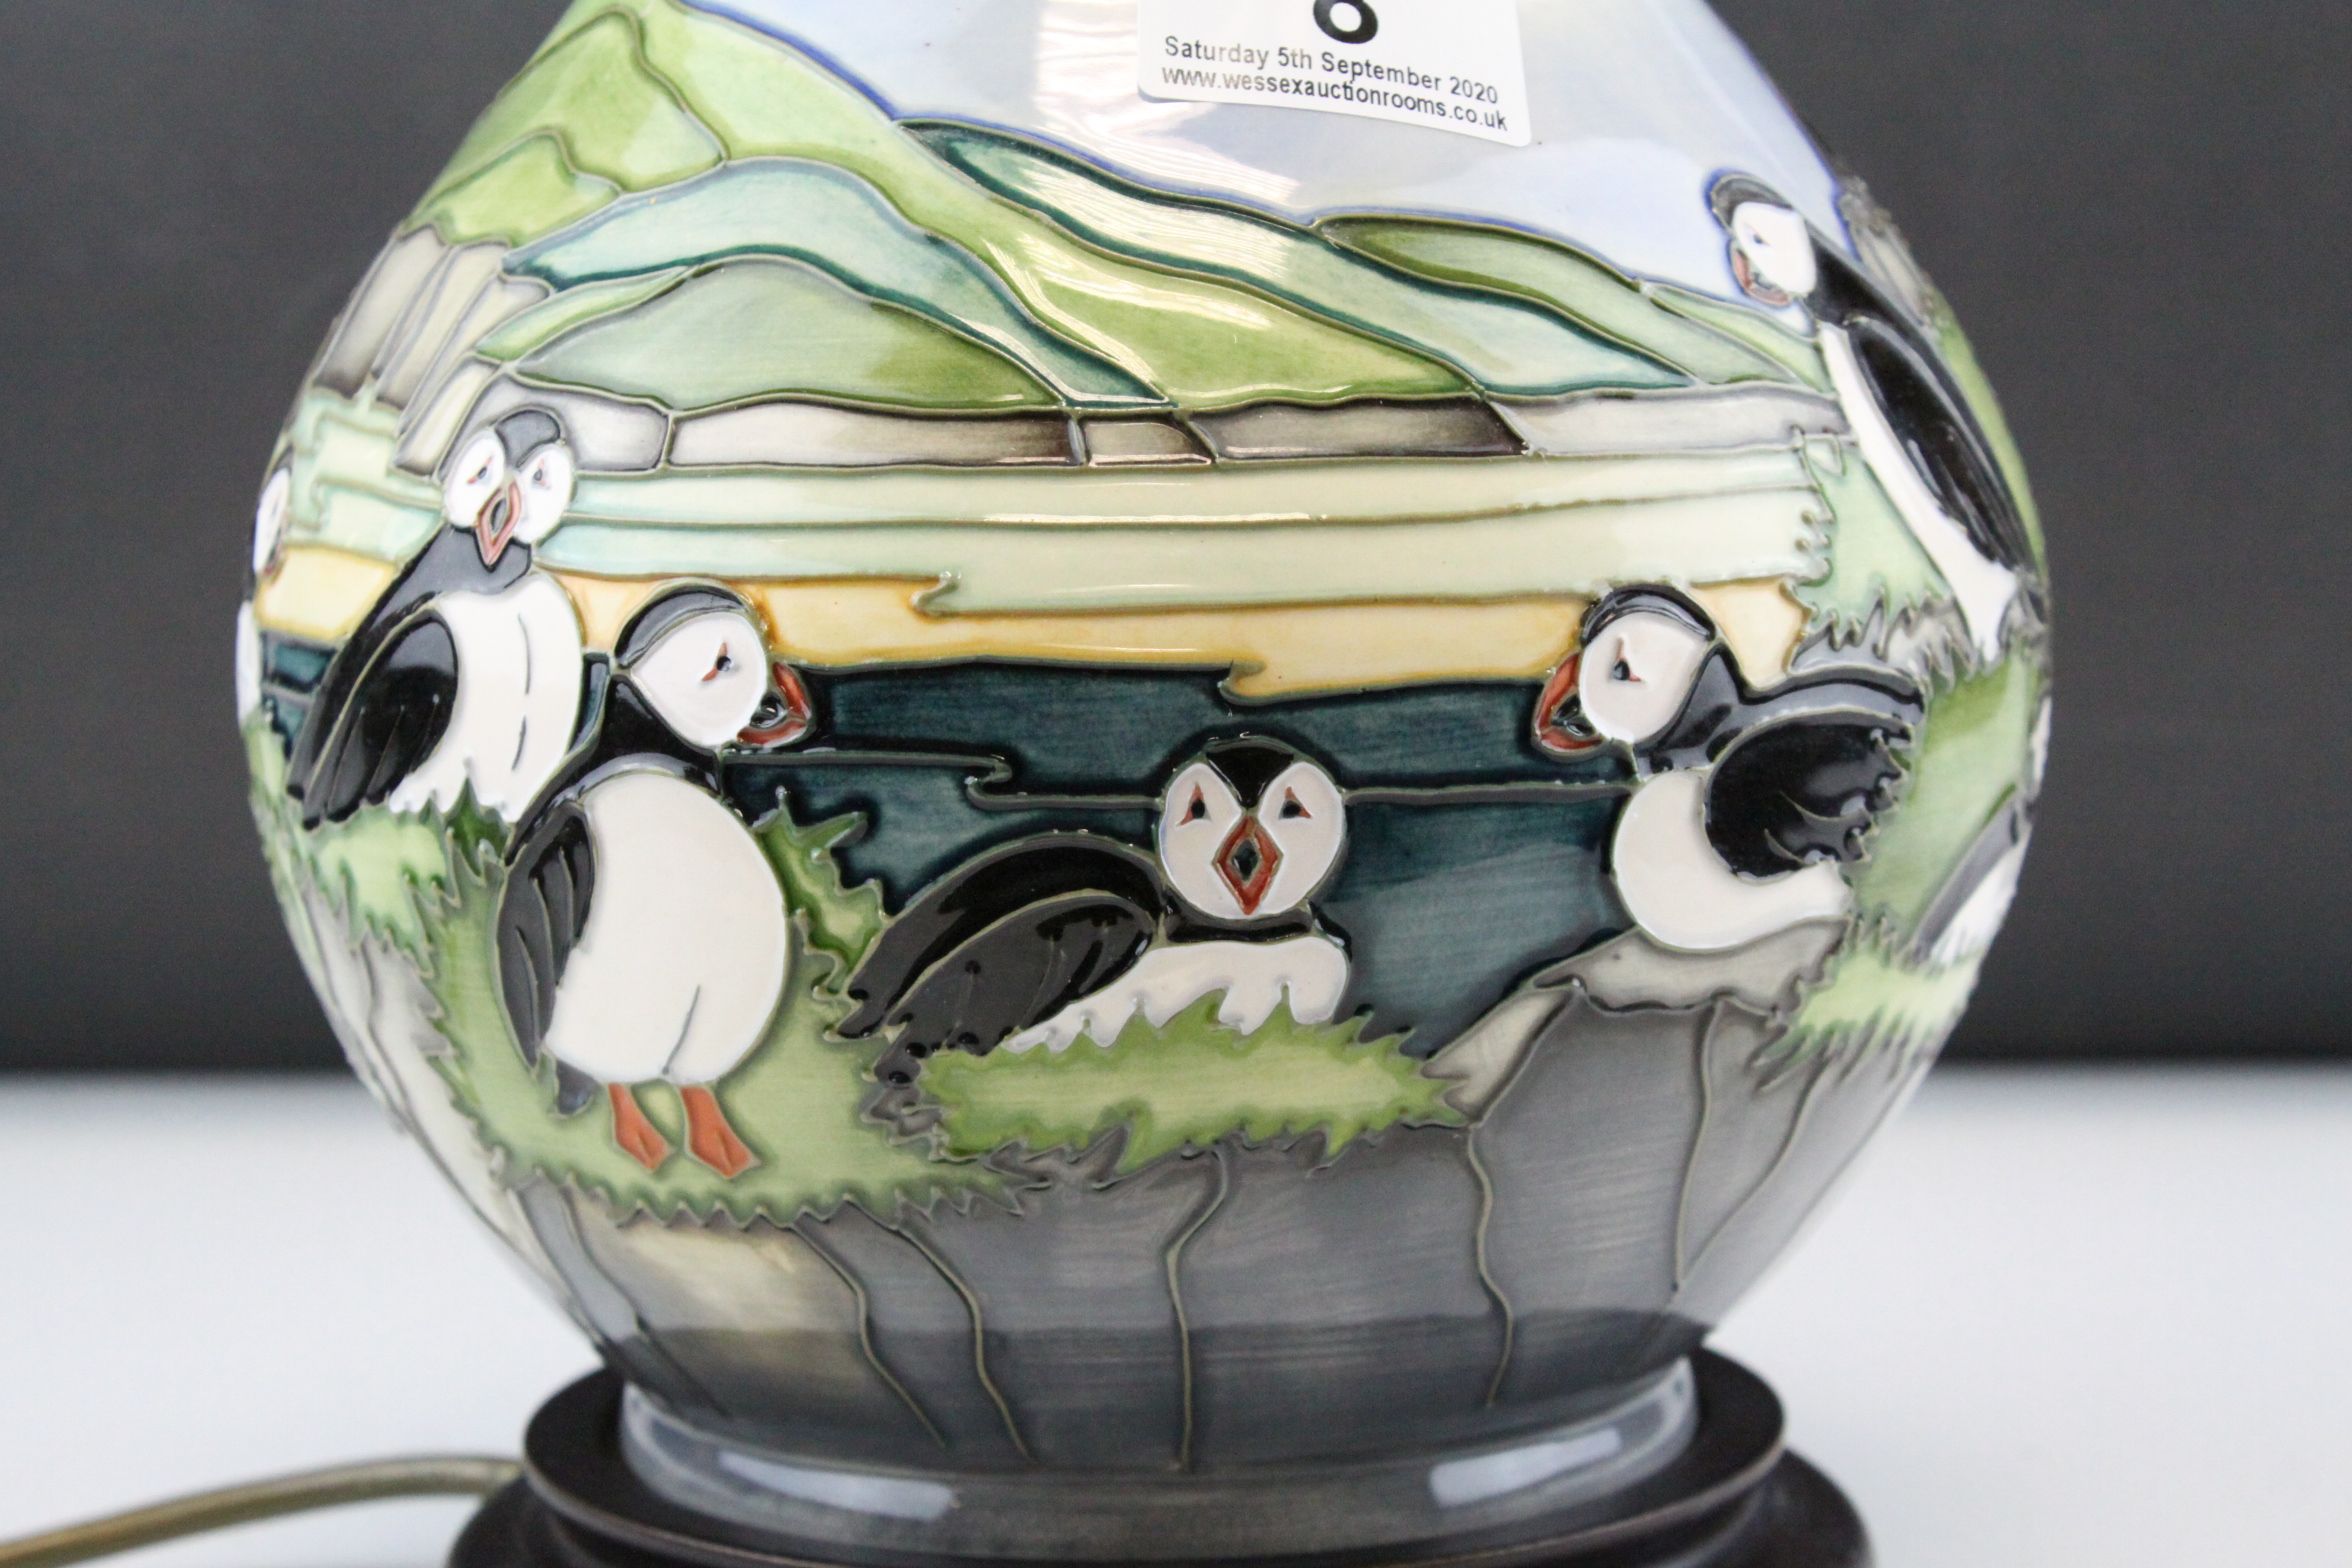 Moorcroft ' Puffin ' Baluster Table Lamp, height to top of ceramic body 27cms - Image 2 of 6